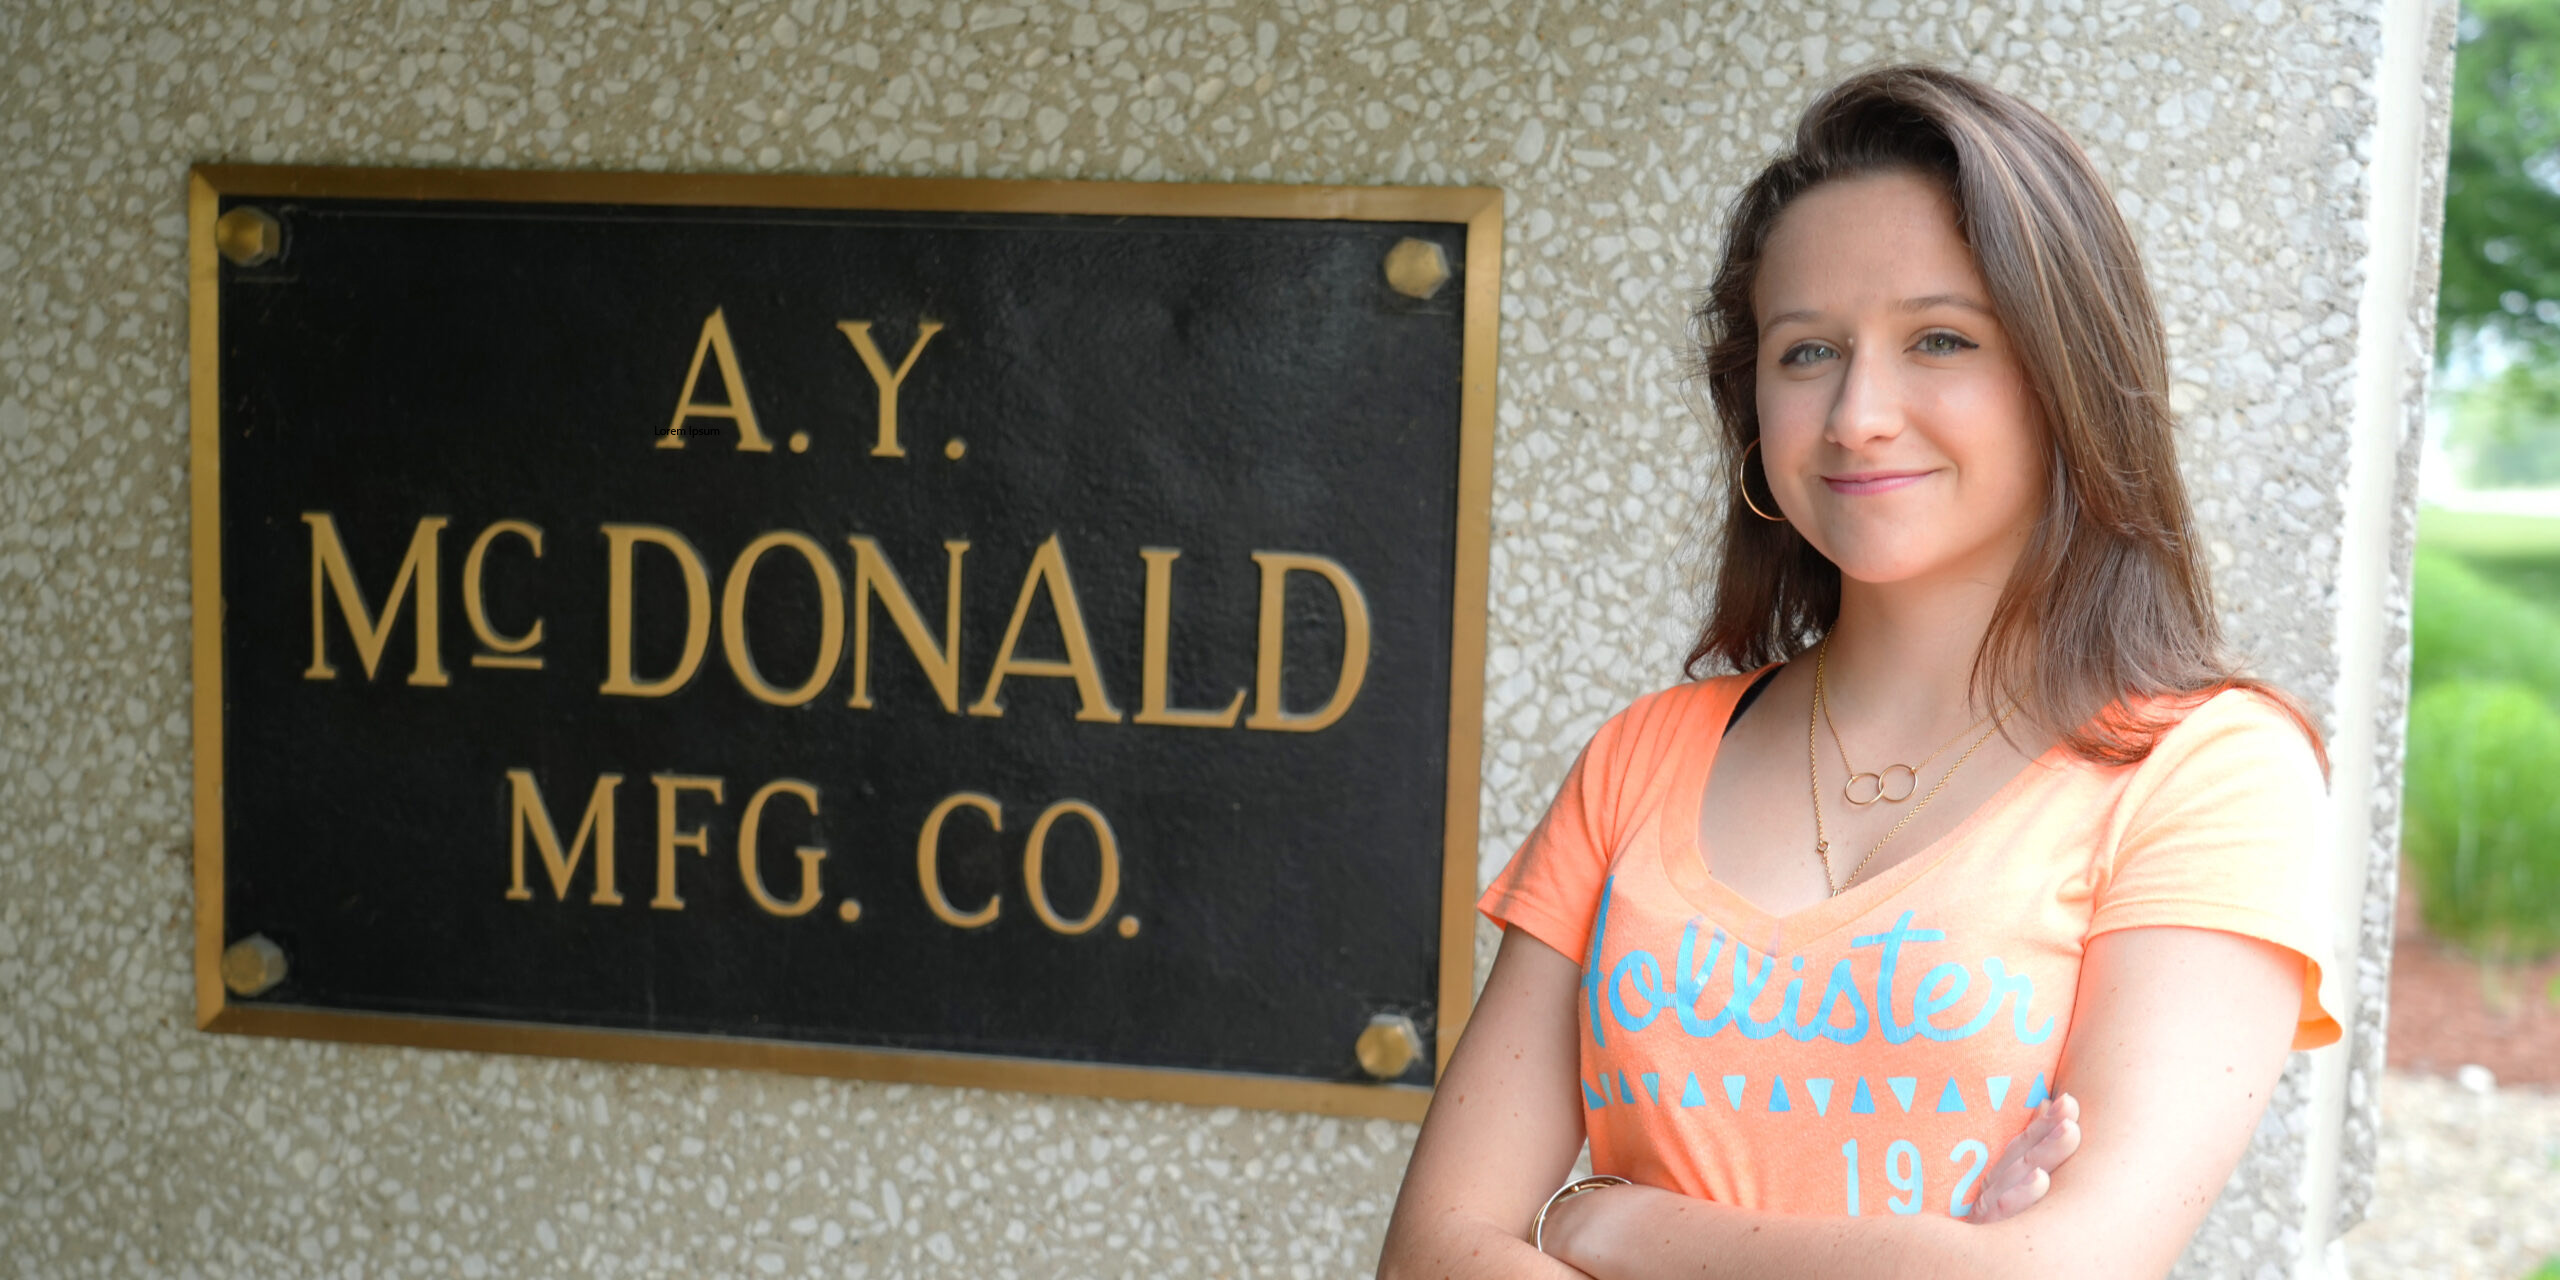 Emilie Loras at her internship standing in front of A.Y. McDonald sign